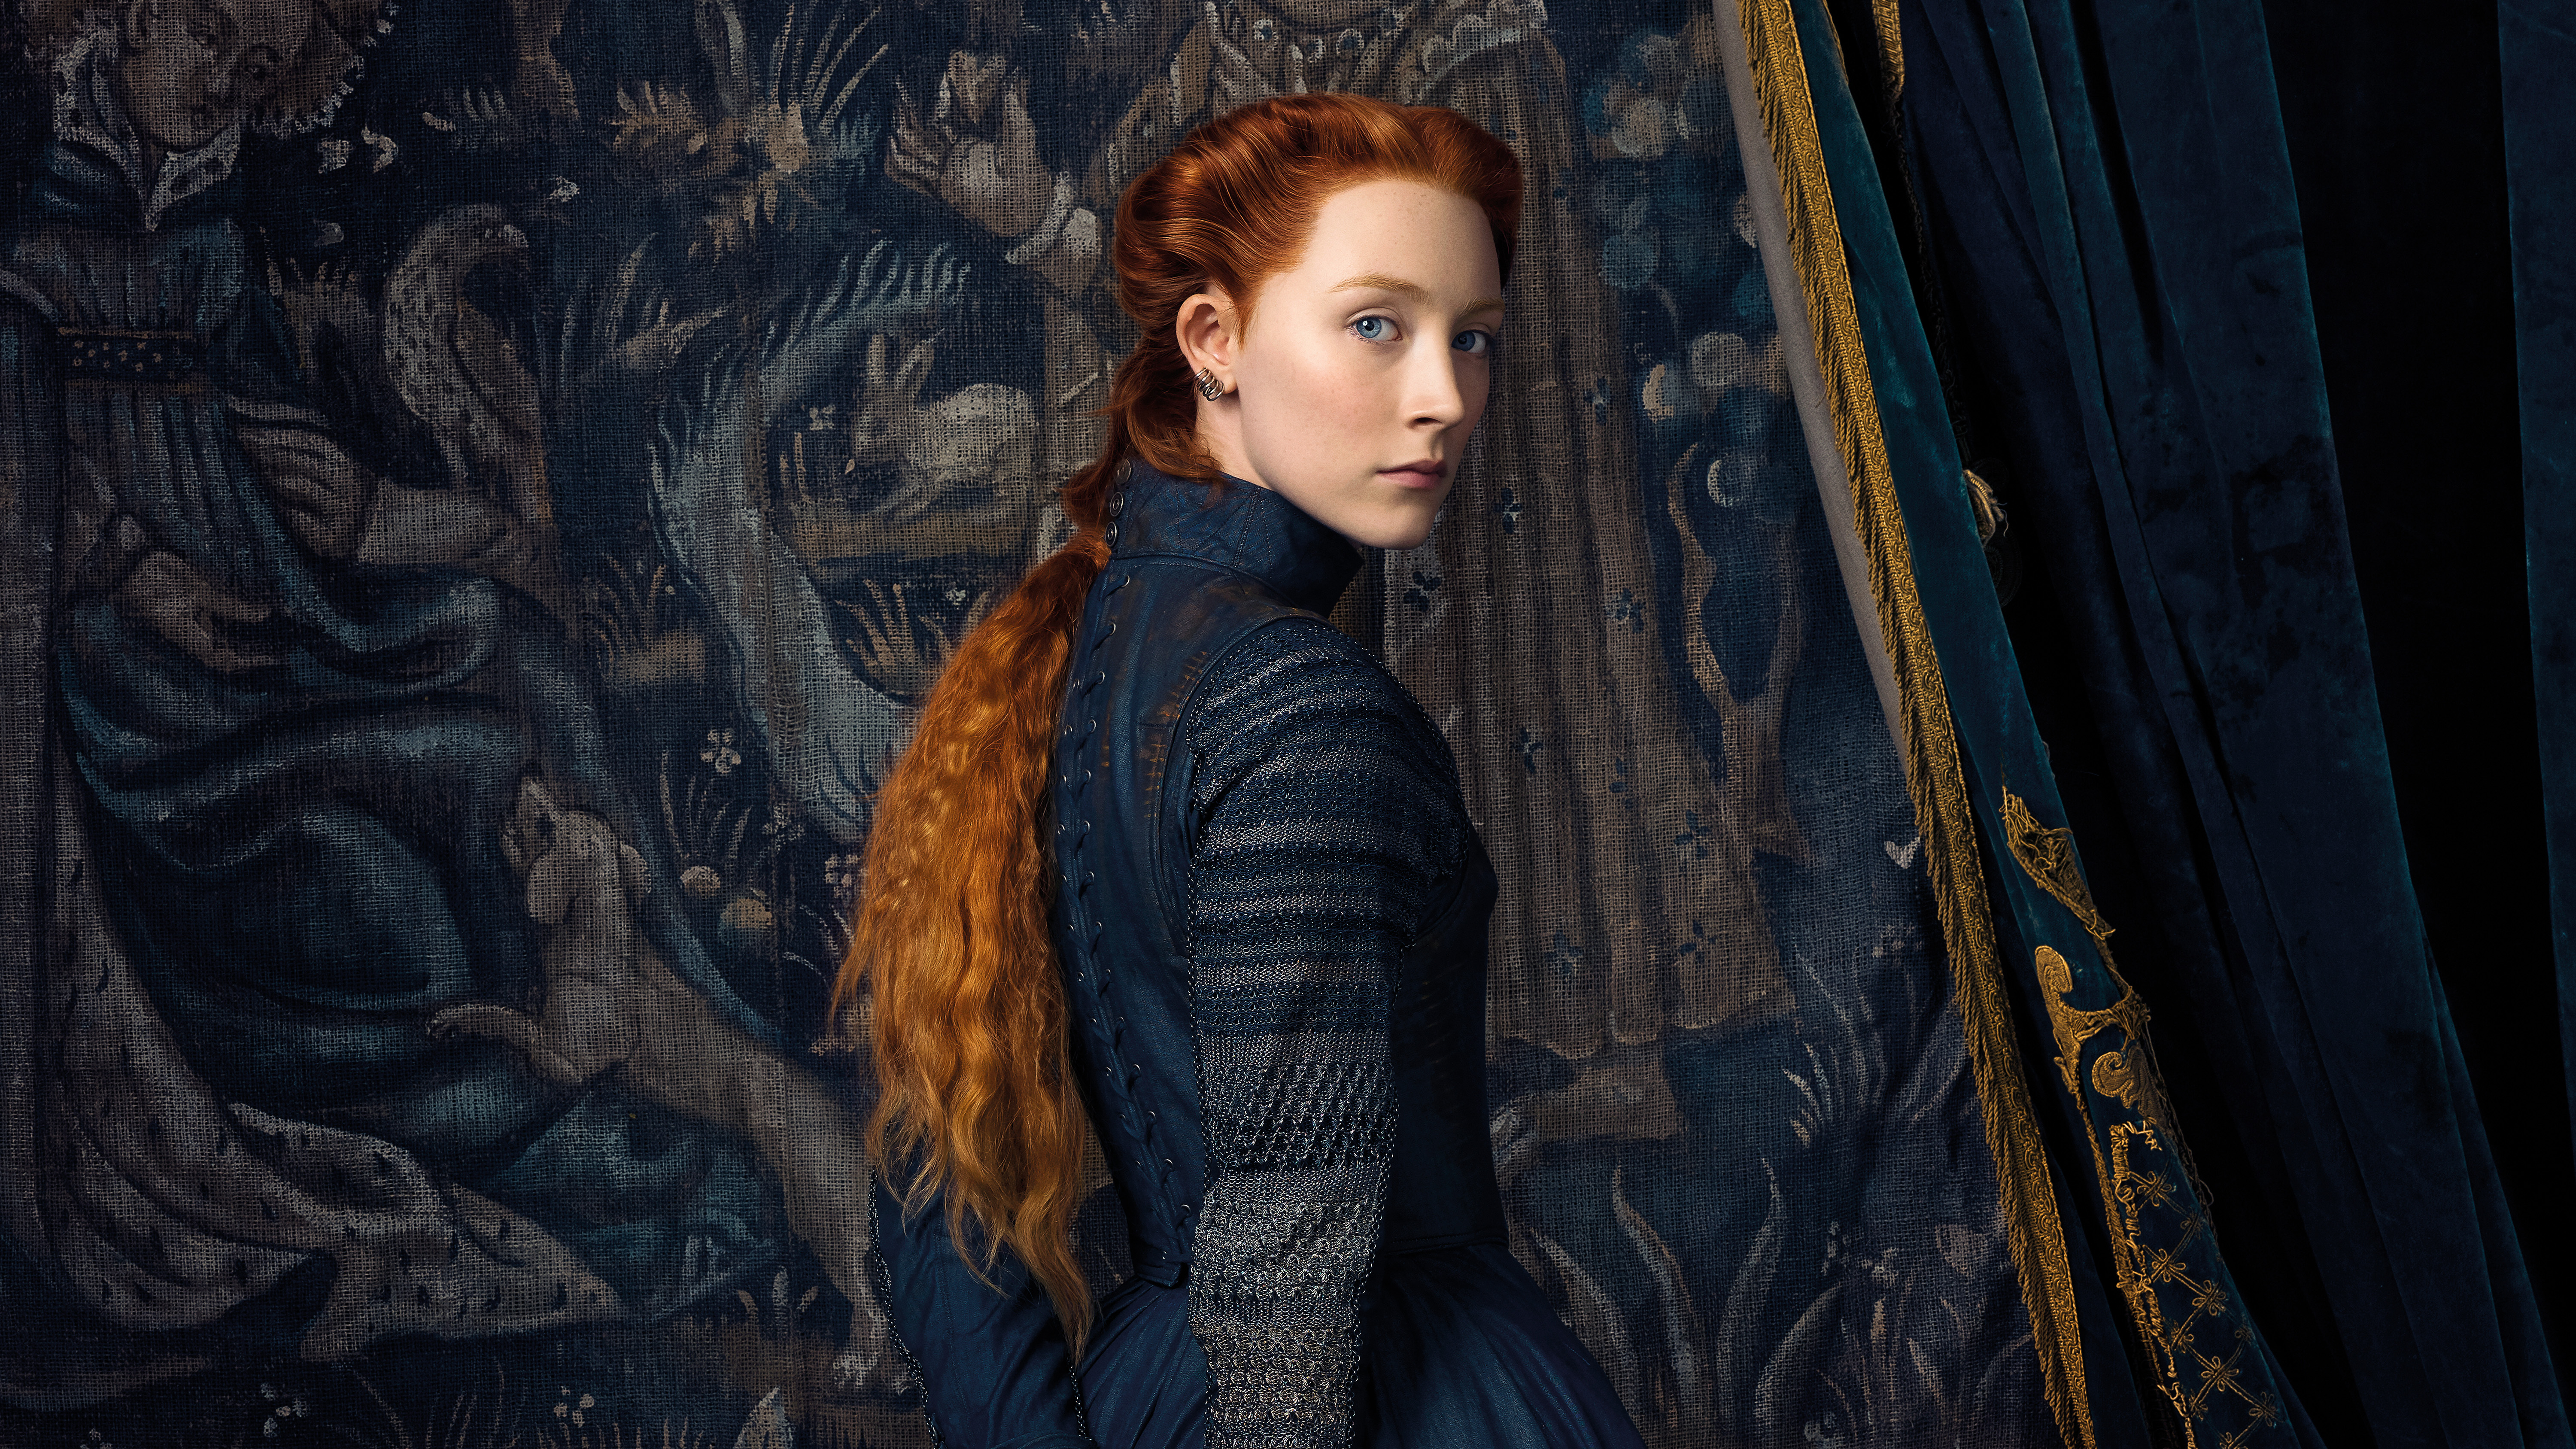 Mary Queen of Scots 2018 5K Wallpapers